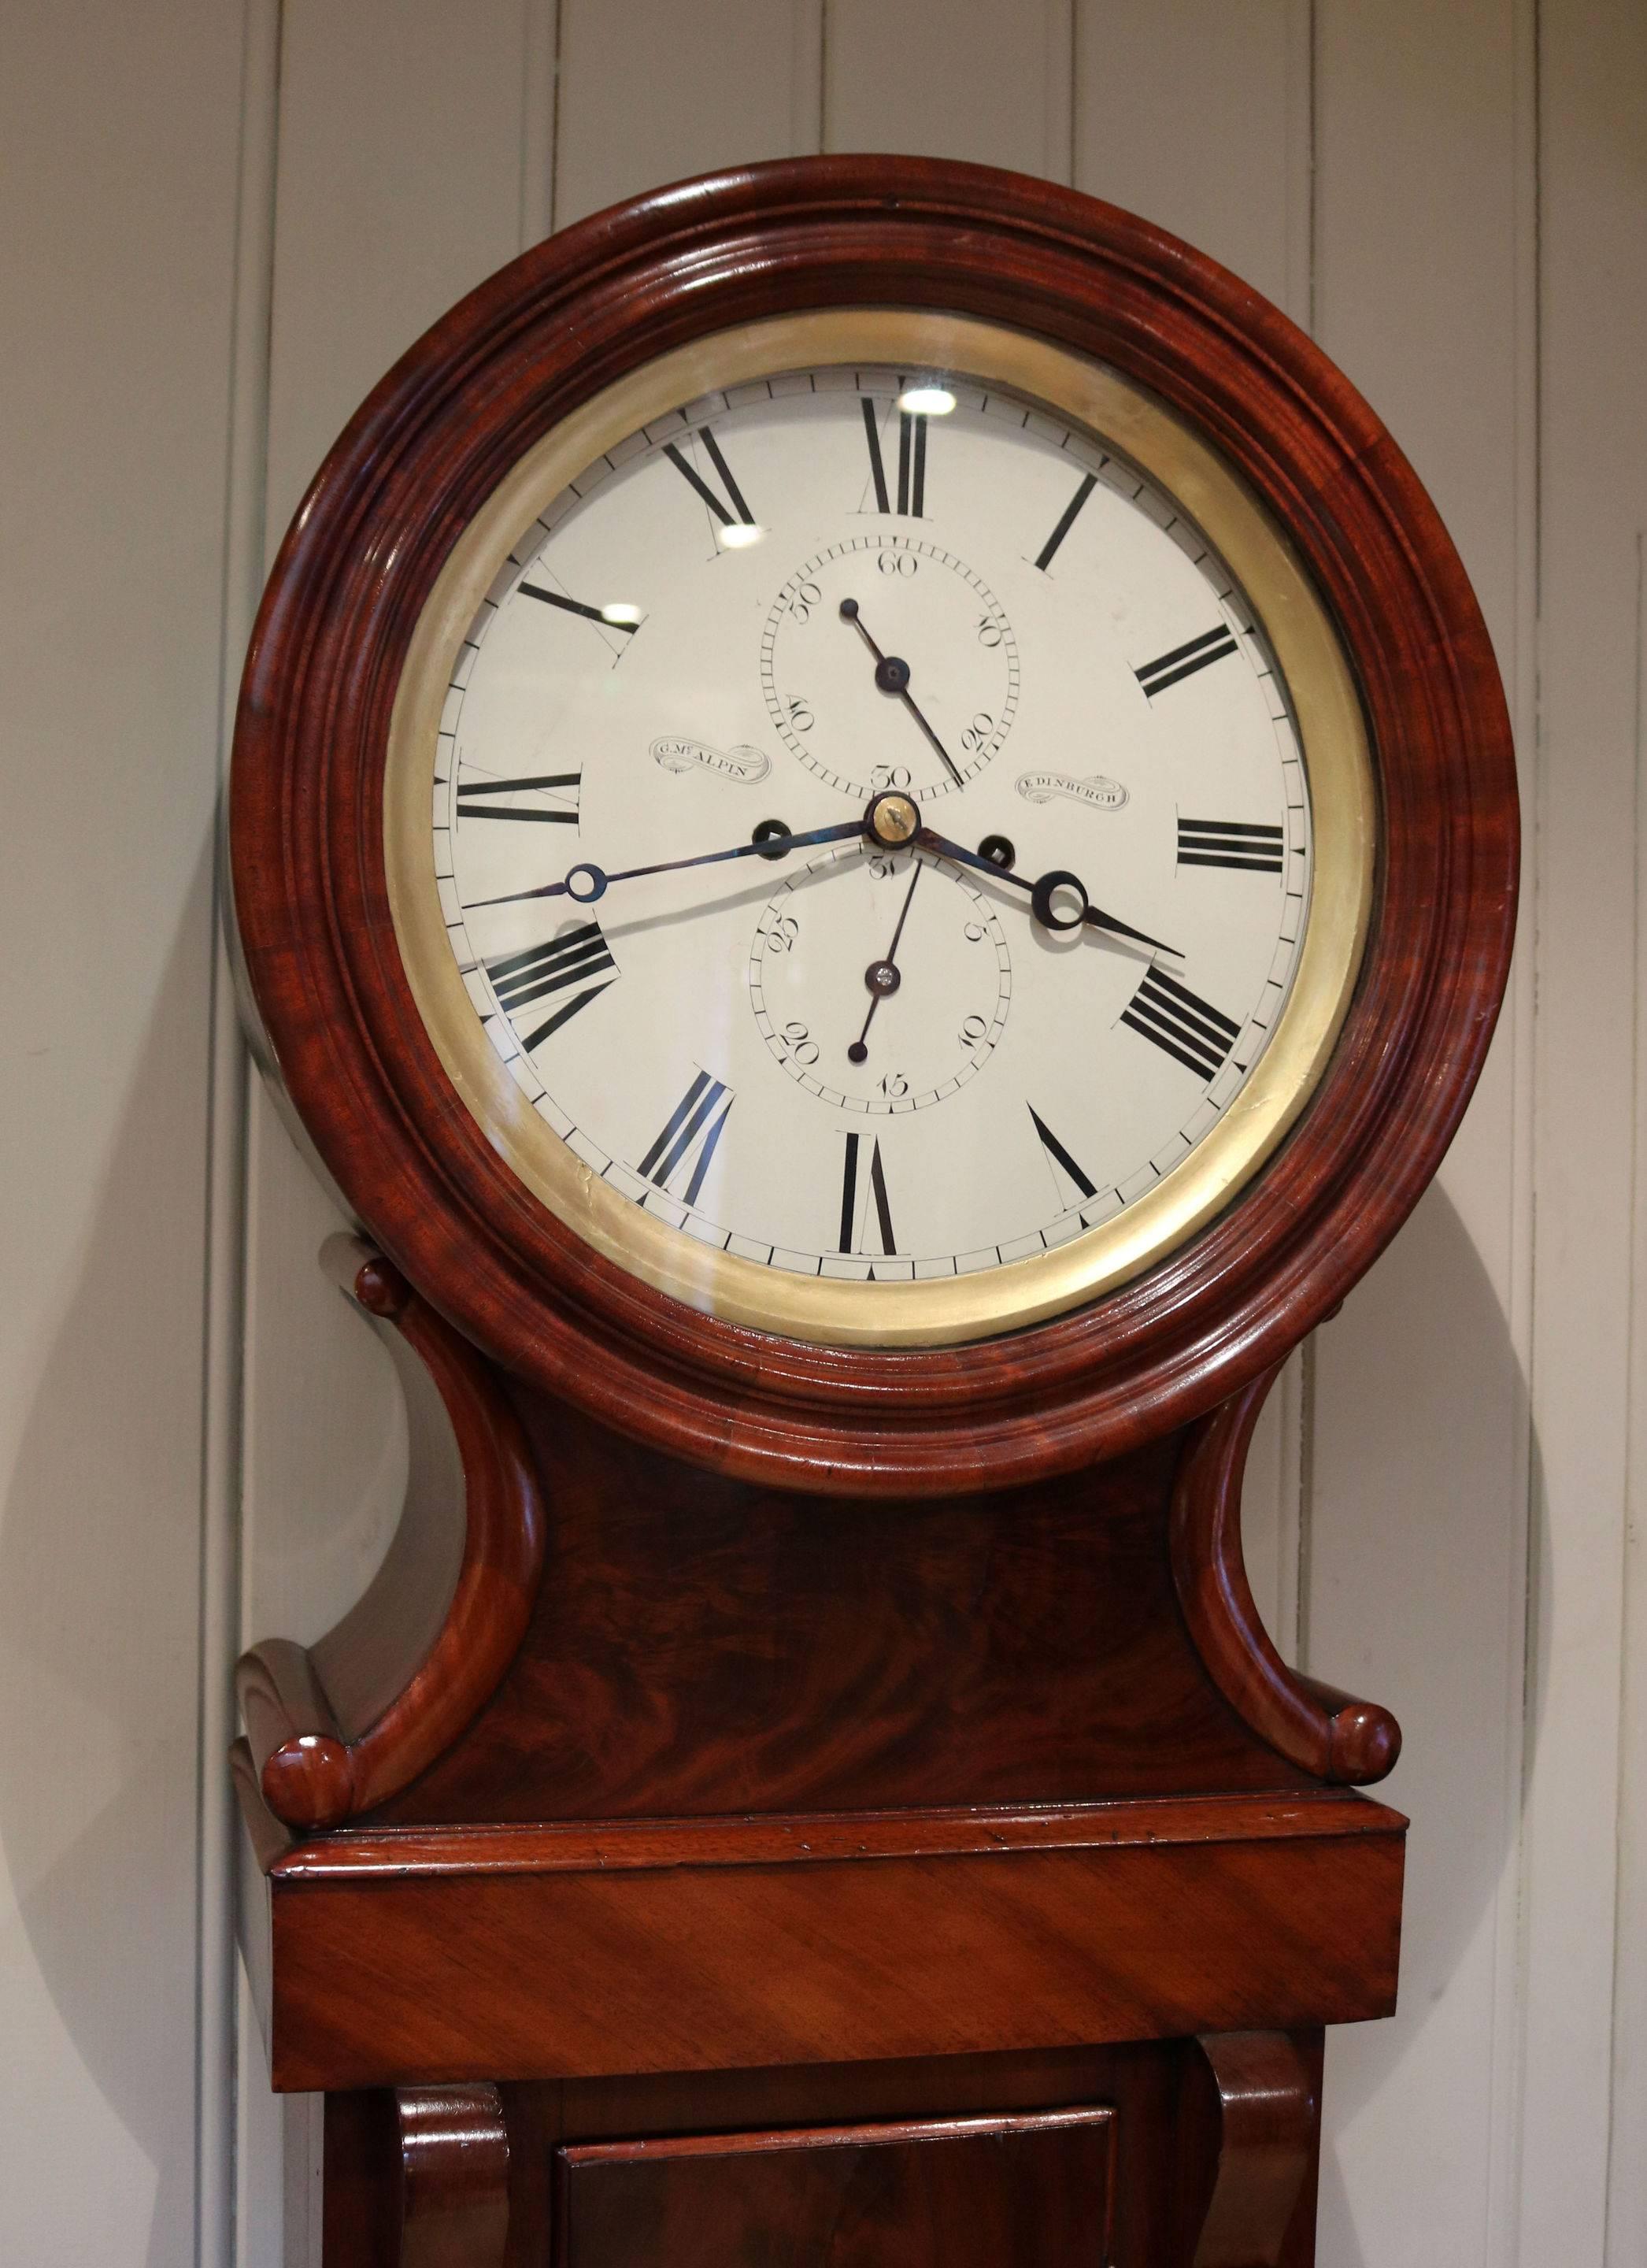 An original Mahogany longcase clock made in the first half of the 19th century. It has a typical Edinburgh drumhead case, with a nicely figured door base and intermediate sections. The lift up circular door has a gilt sight ring. The white enamel